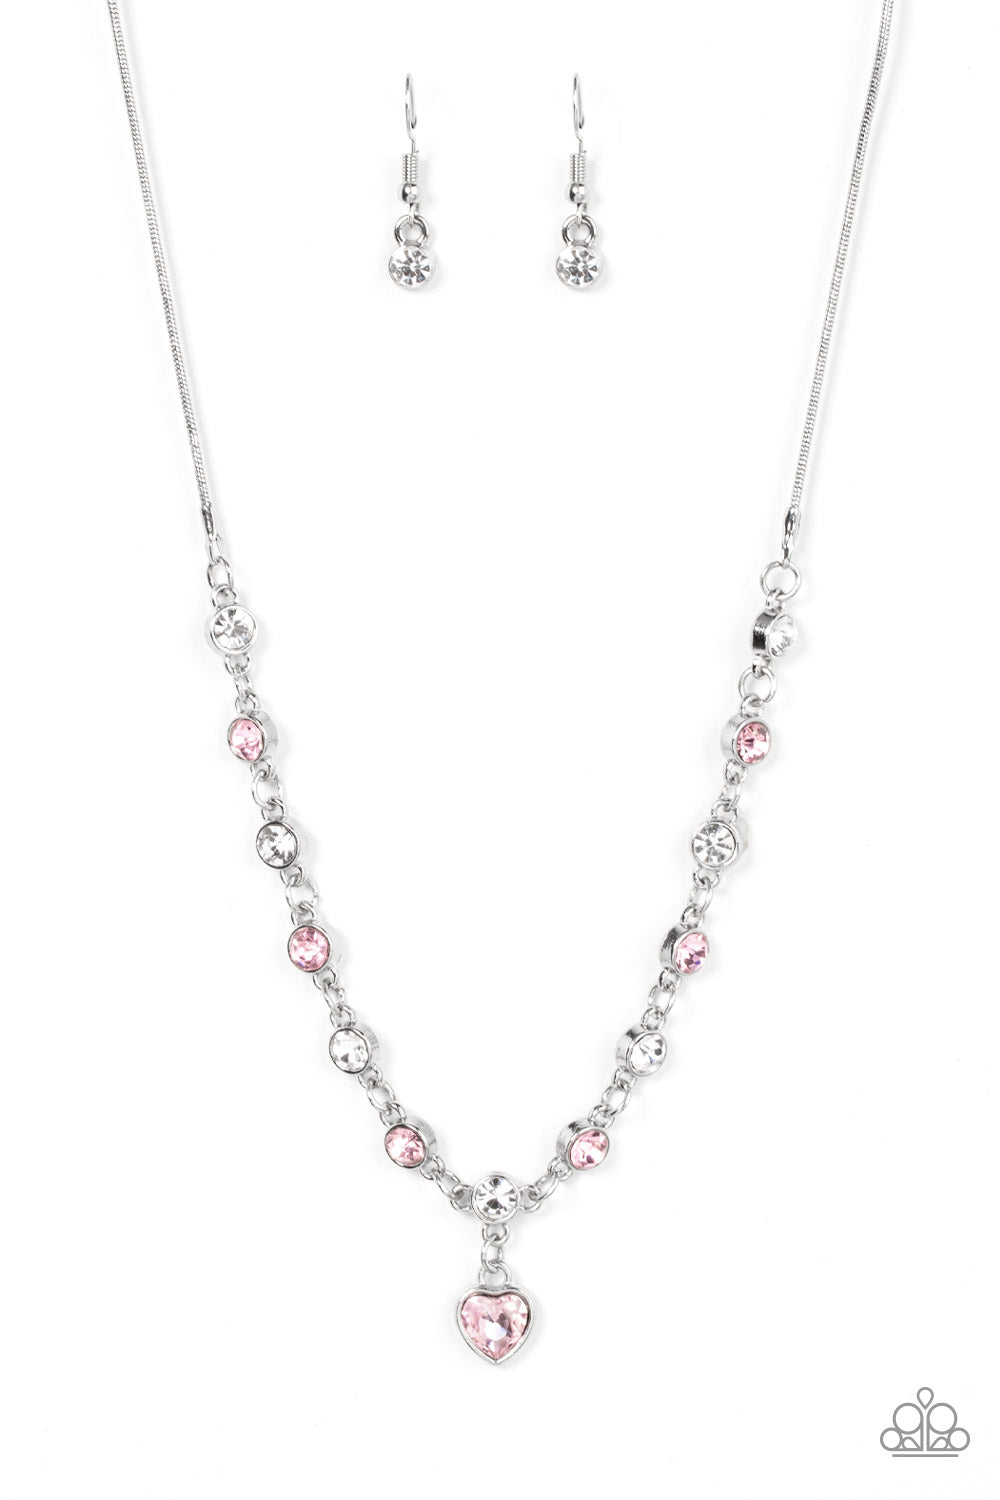 Paparazzi True Love Trinket - Pink Necklace - A Finishing Touch Jewelry